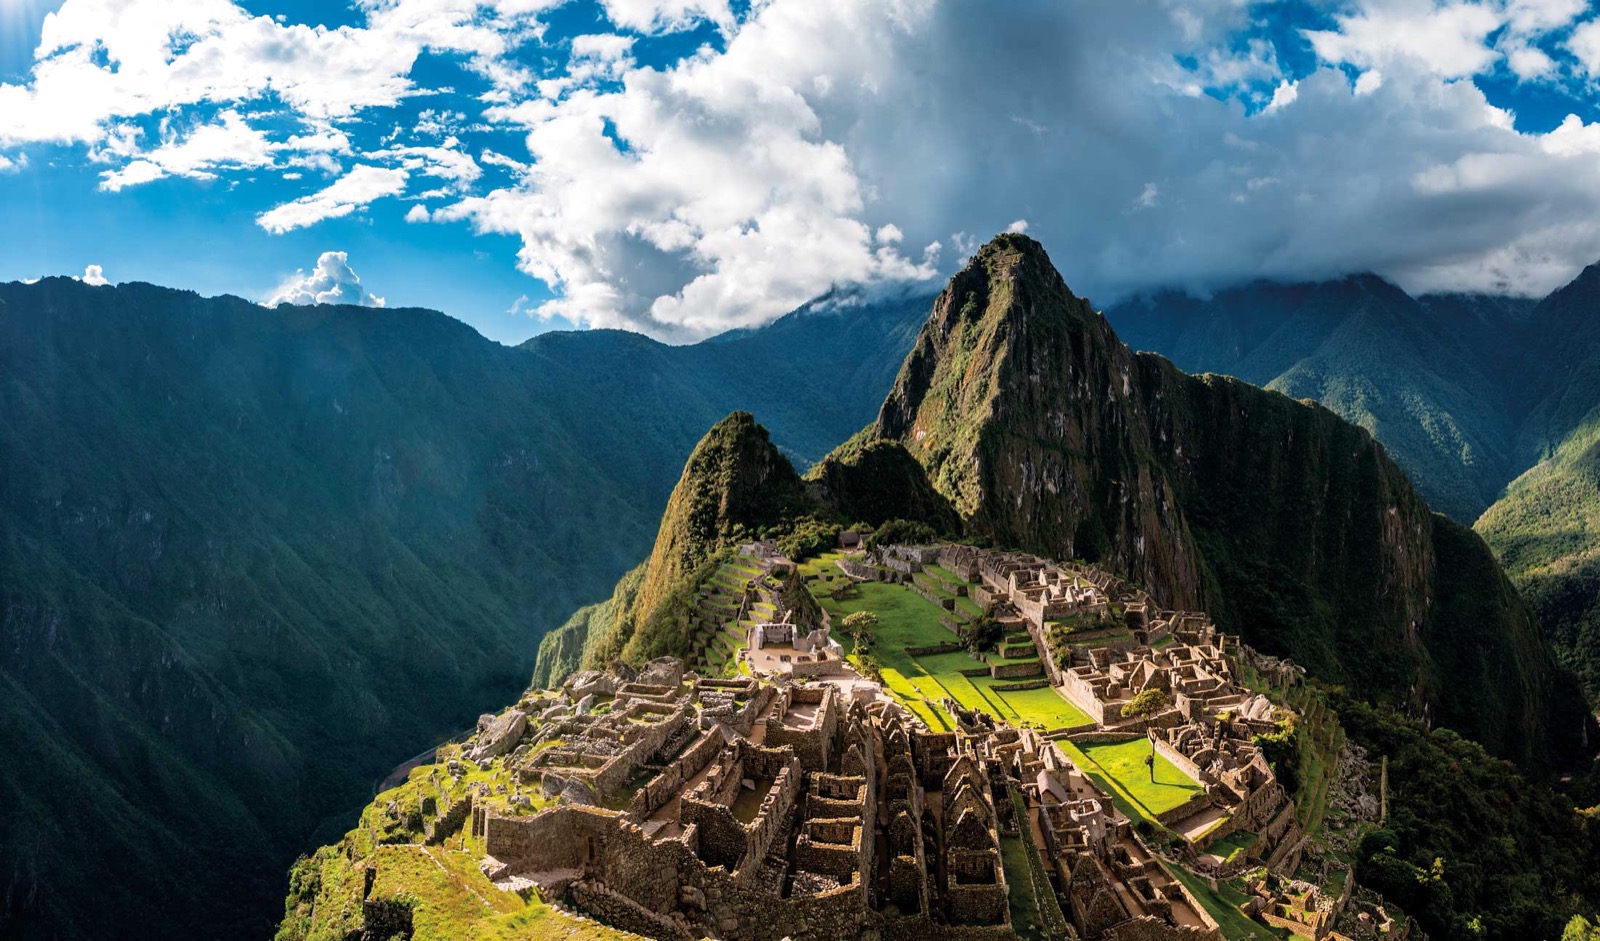 Even If You Don’t Know Much About Geography, Play This World Landmarks Quiz Anyway Machu Picchu, Inca Empire civilization, Peru